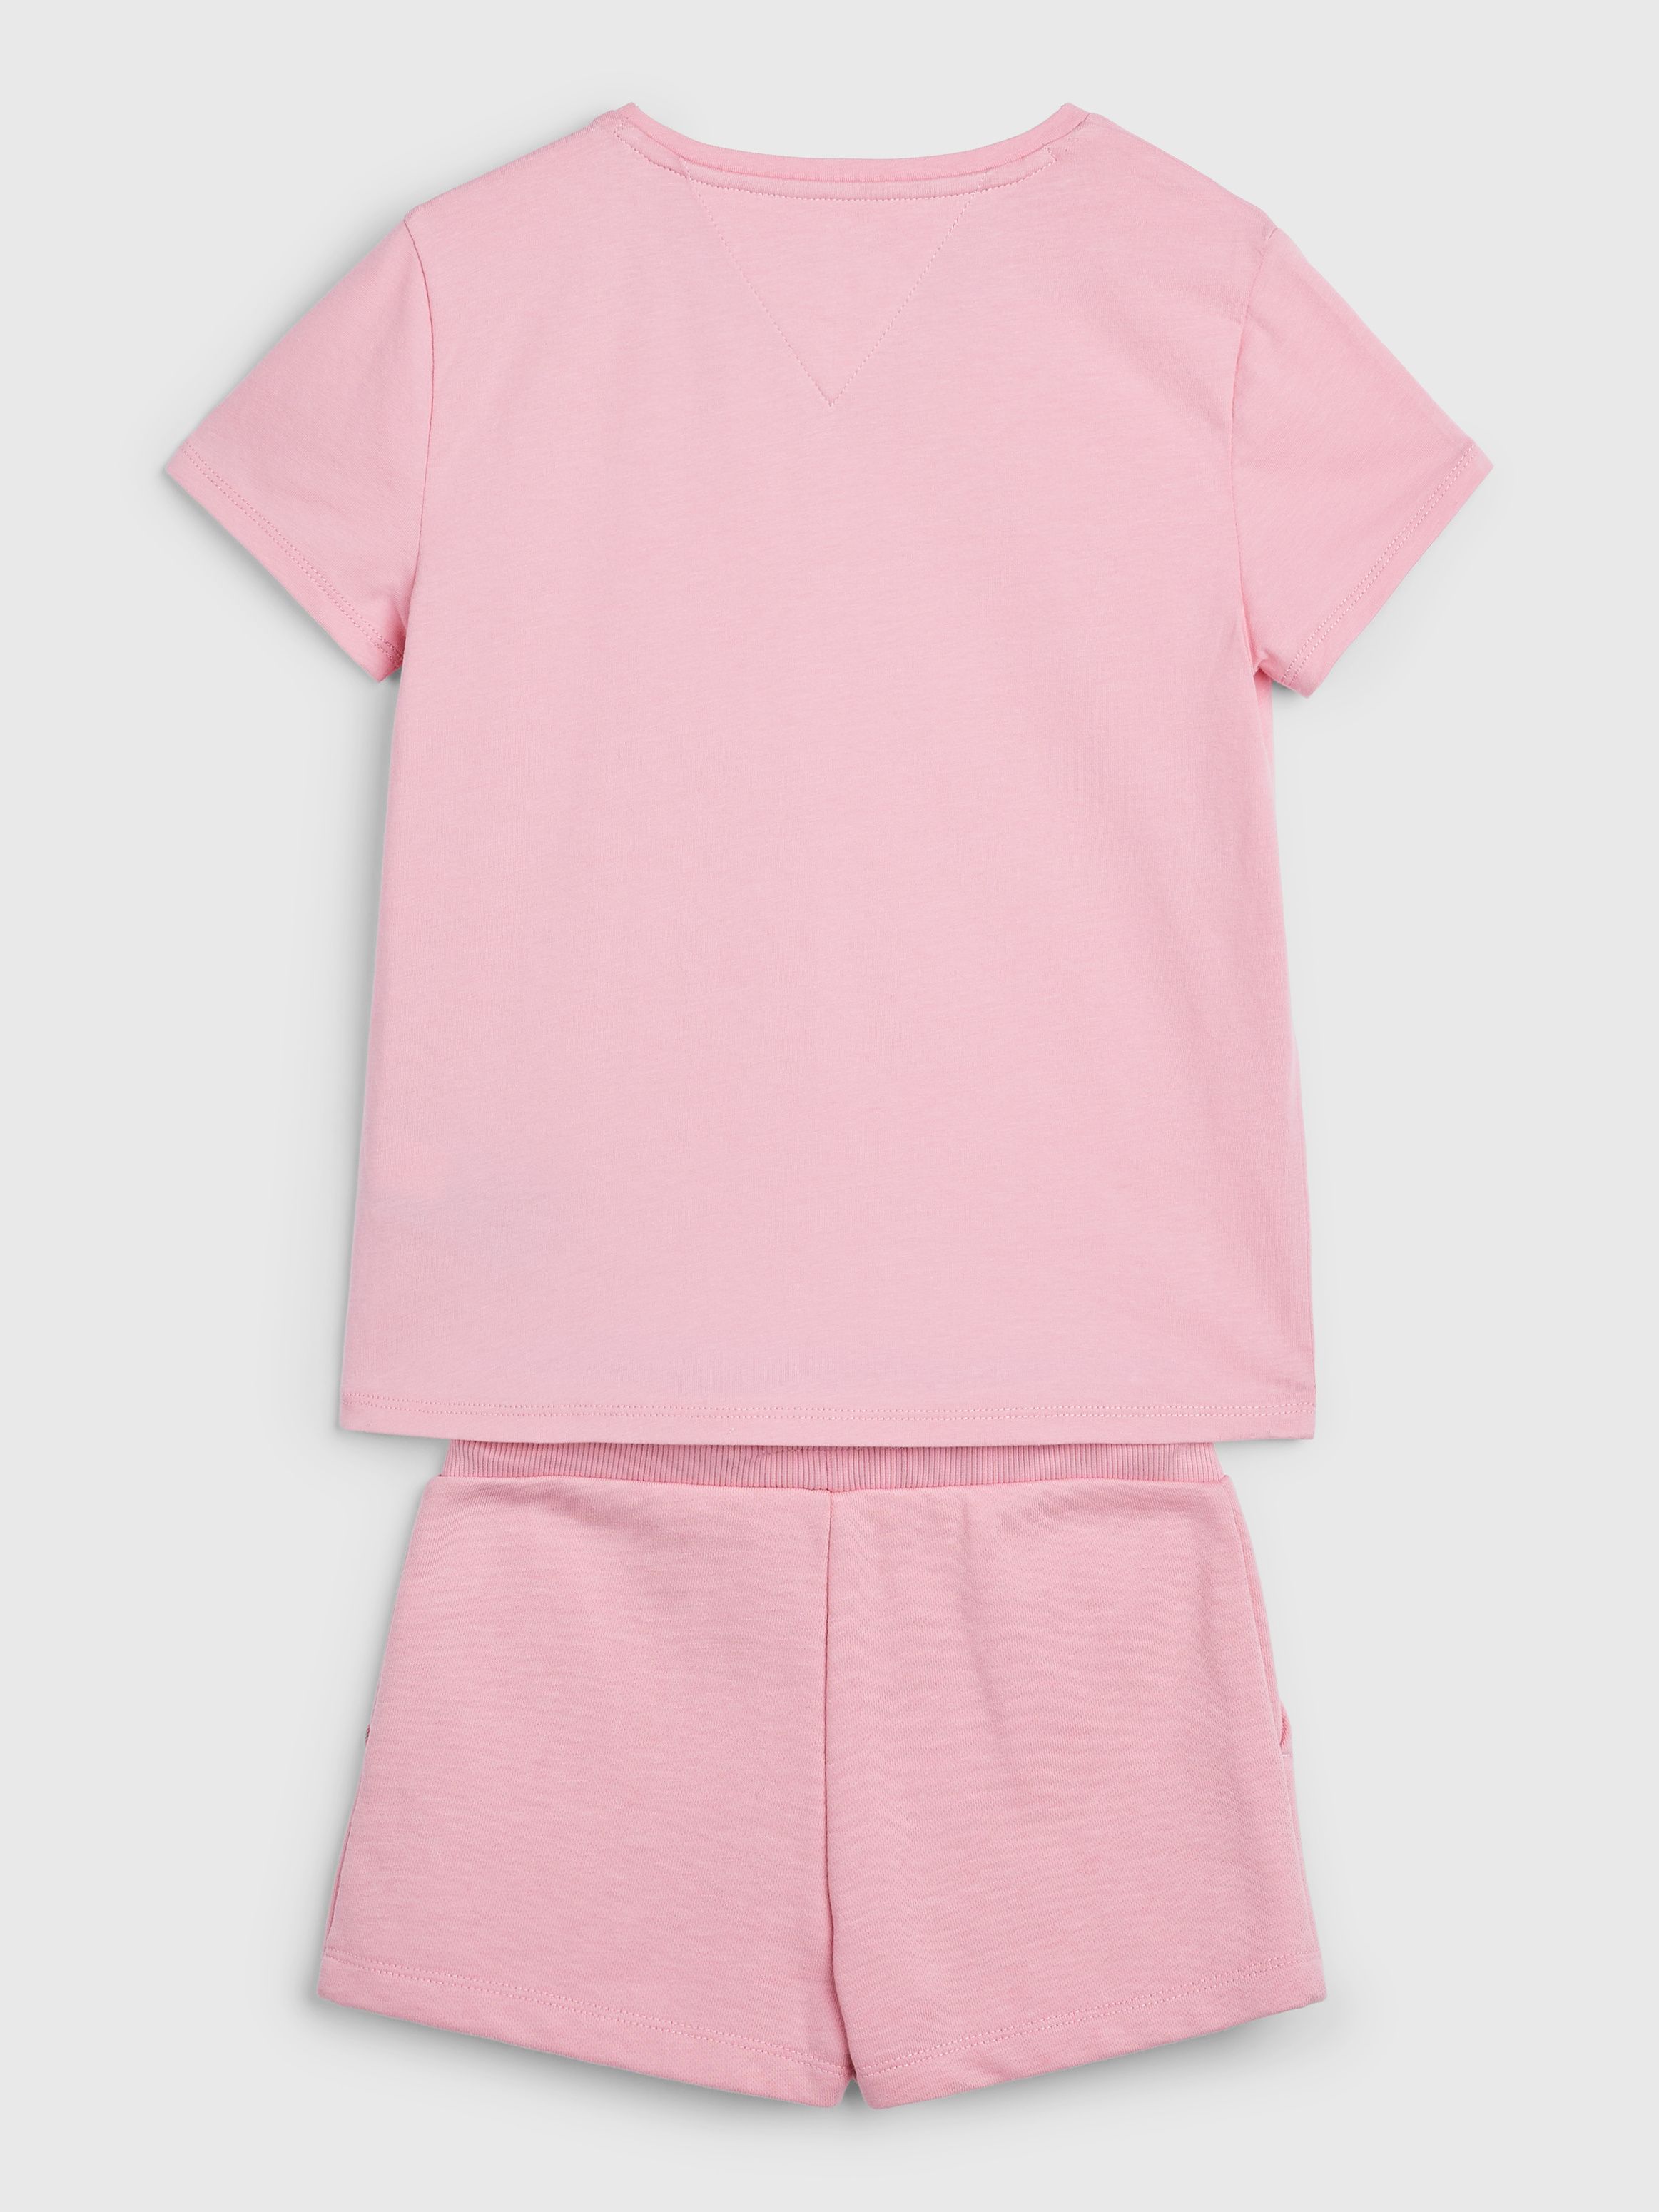 Essential T-Shirt And Shorts Set